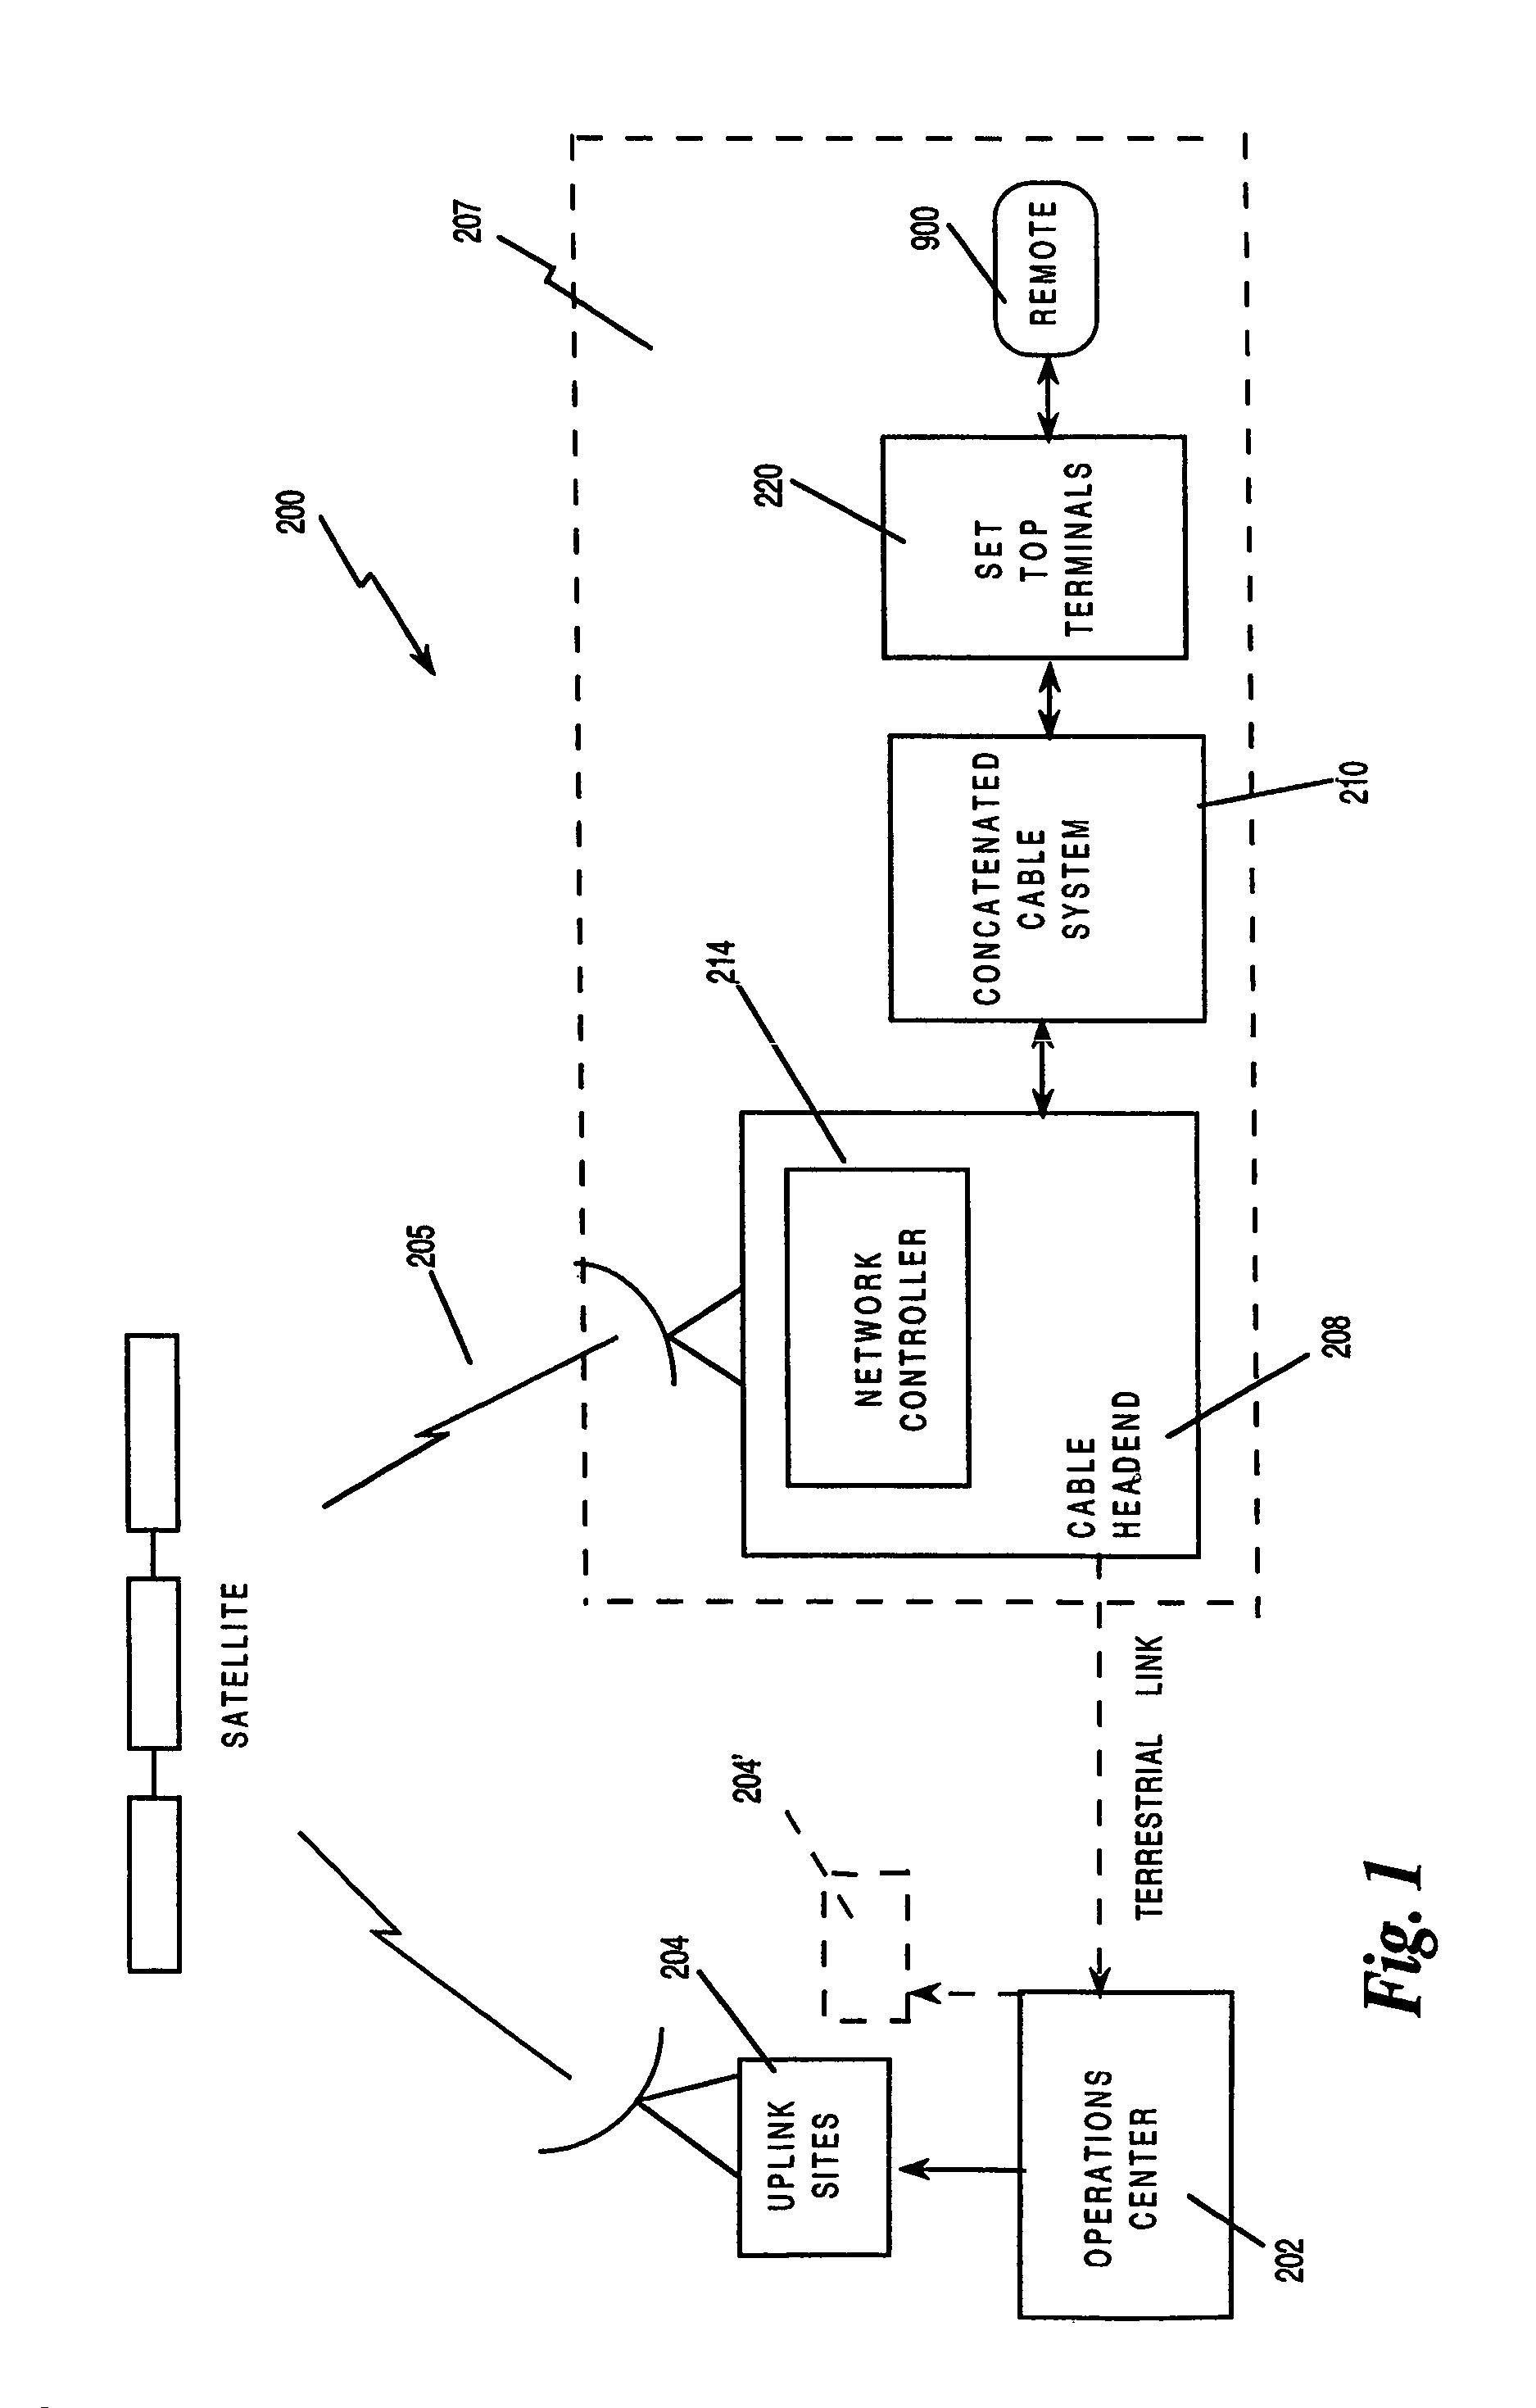 Method and apparatus for targeted advertising